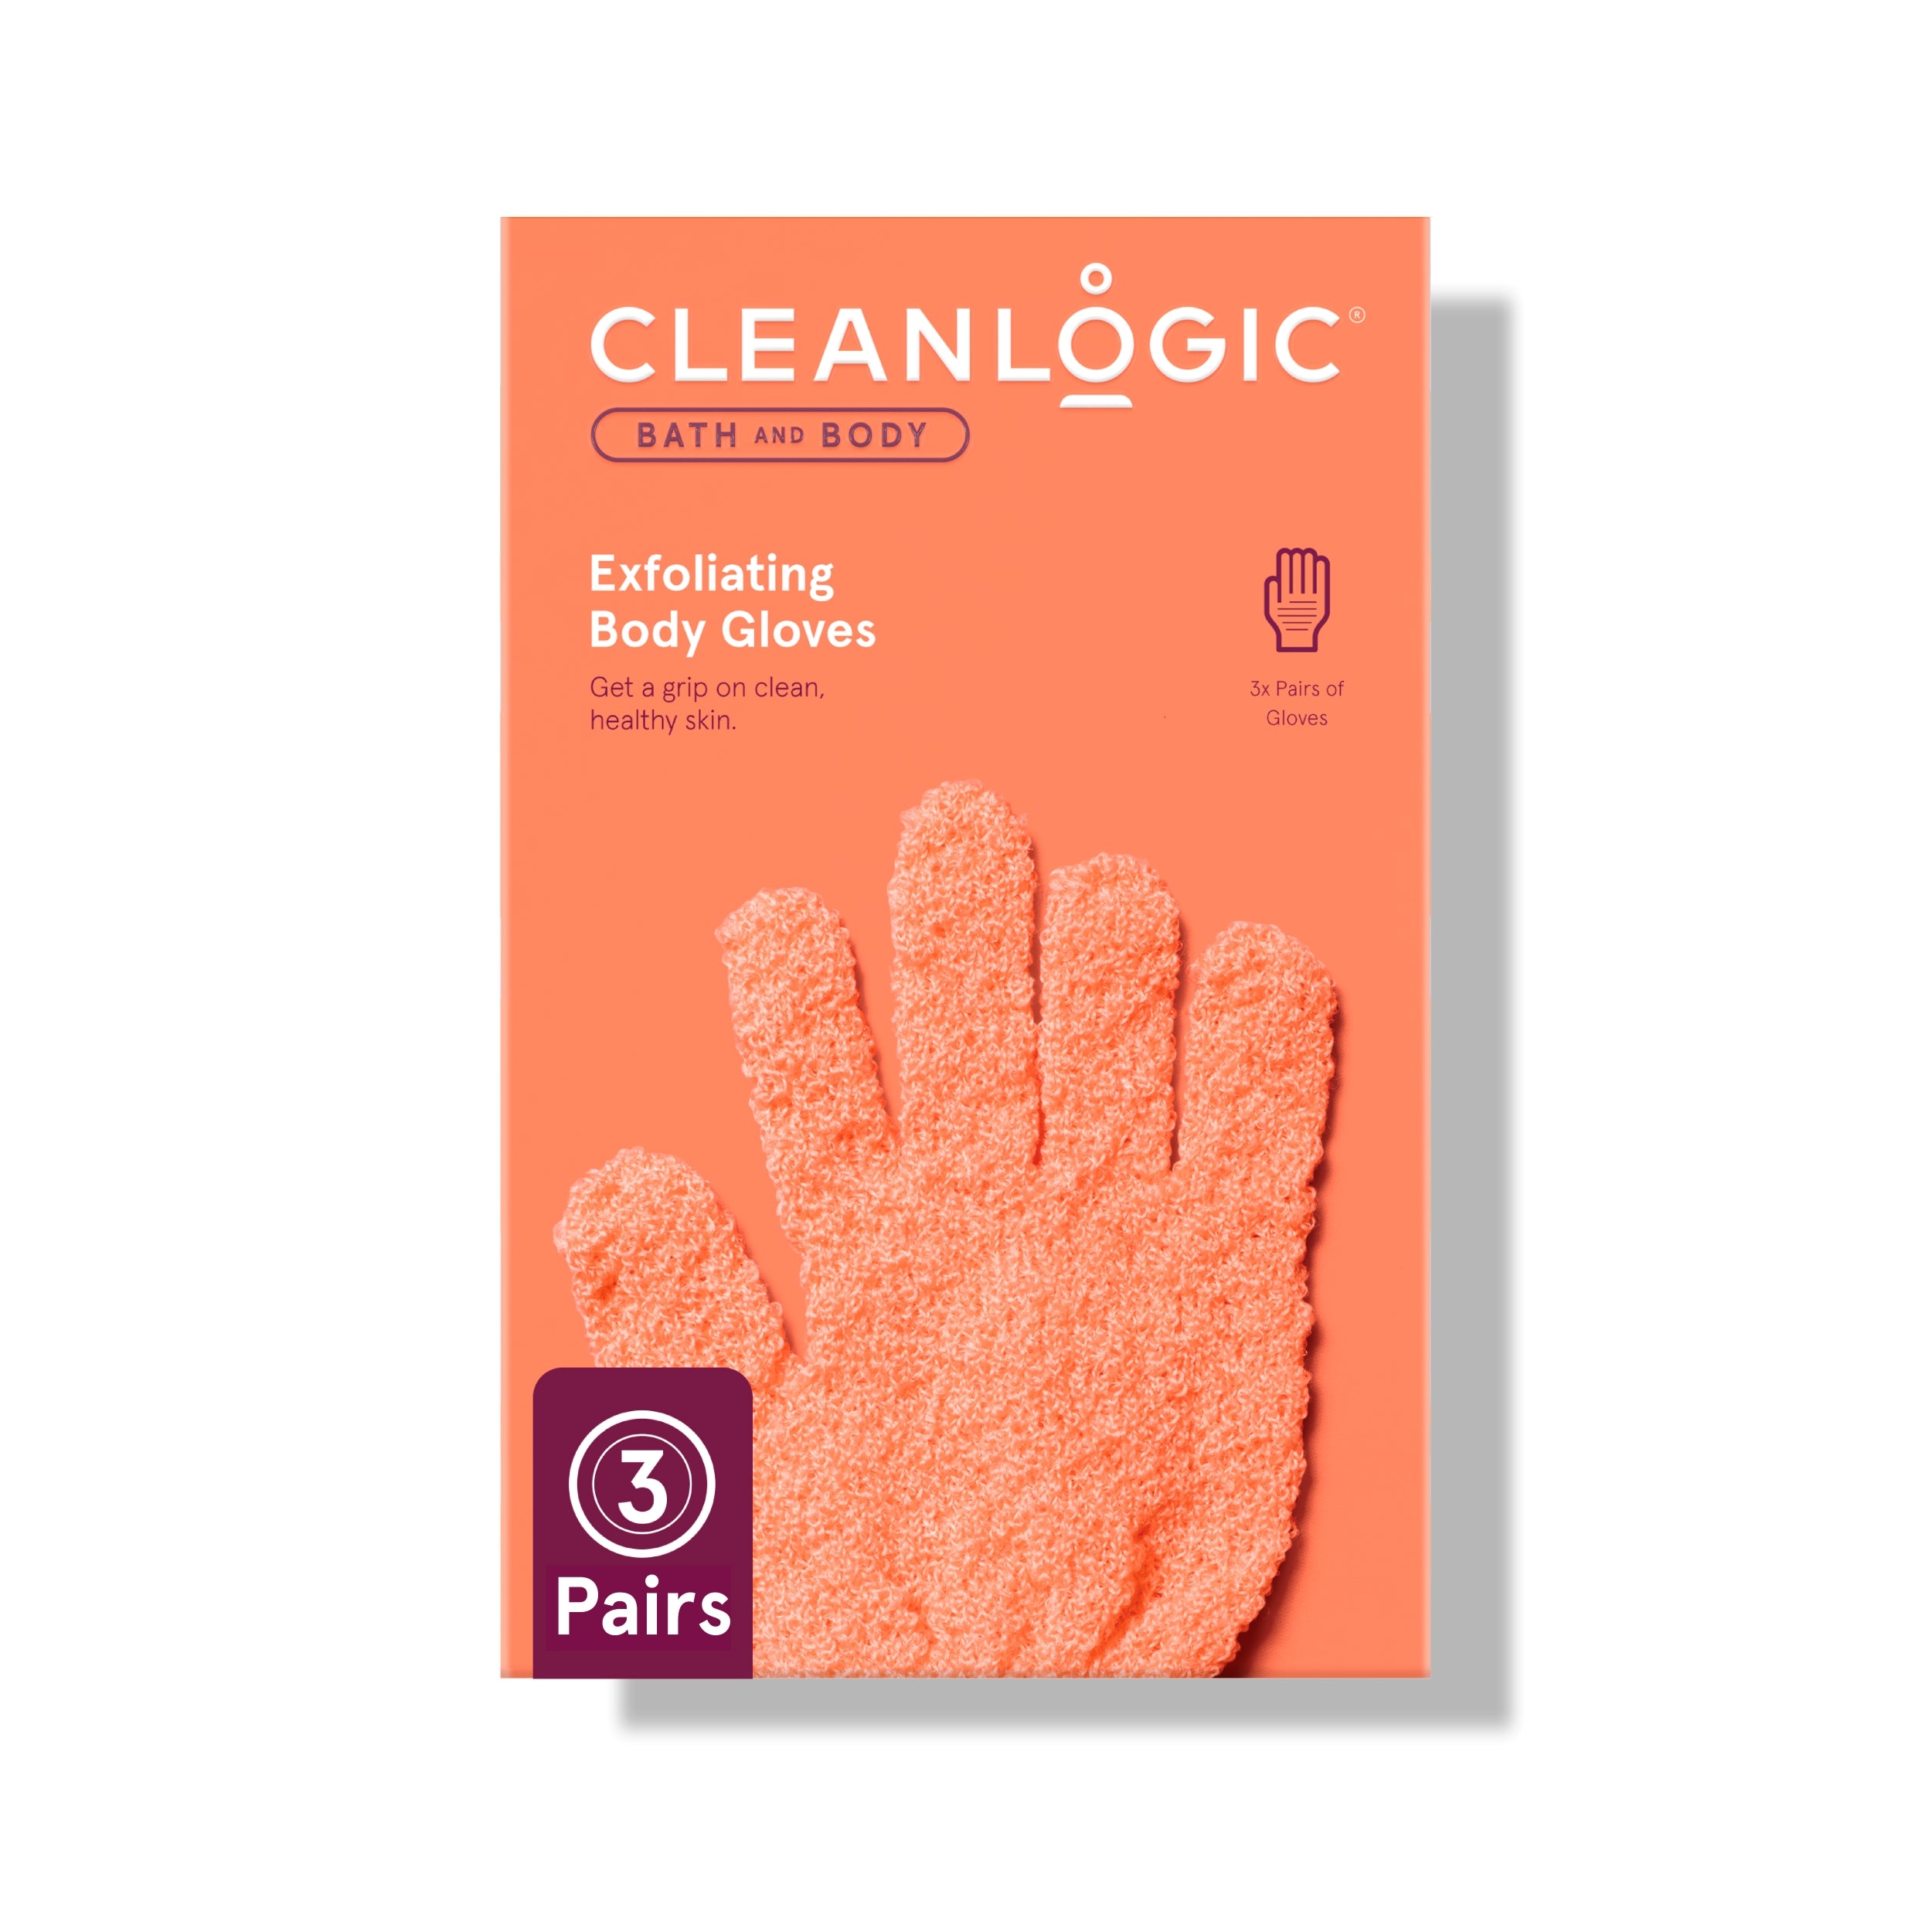 Bath and Body Exfoliating Body Gloves, Assorted Colors, 3 Pair - 6 Count